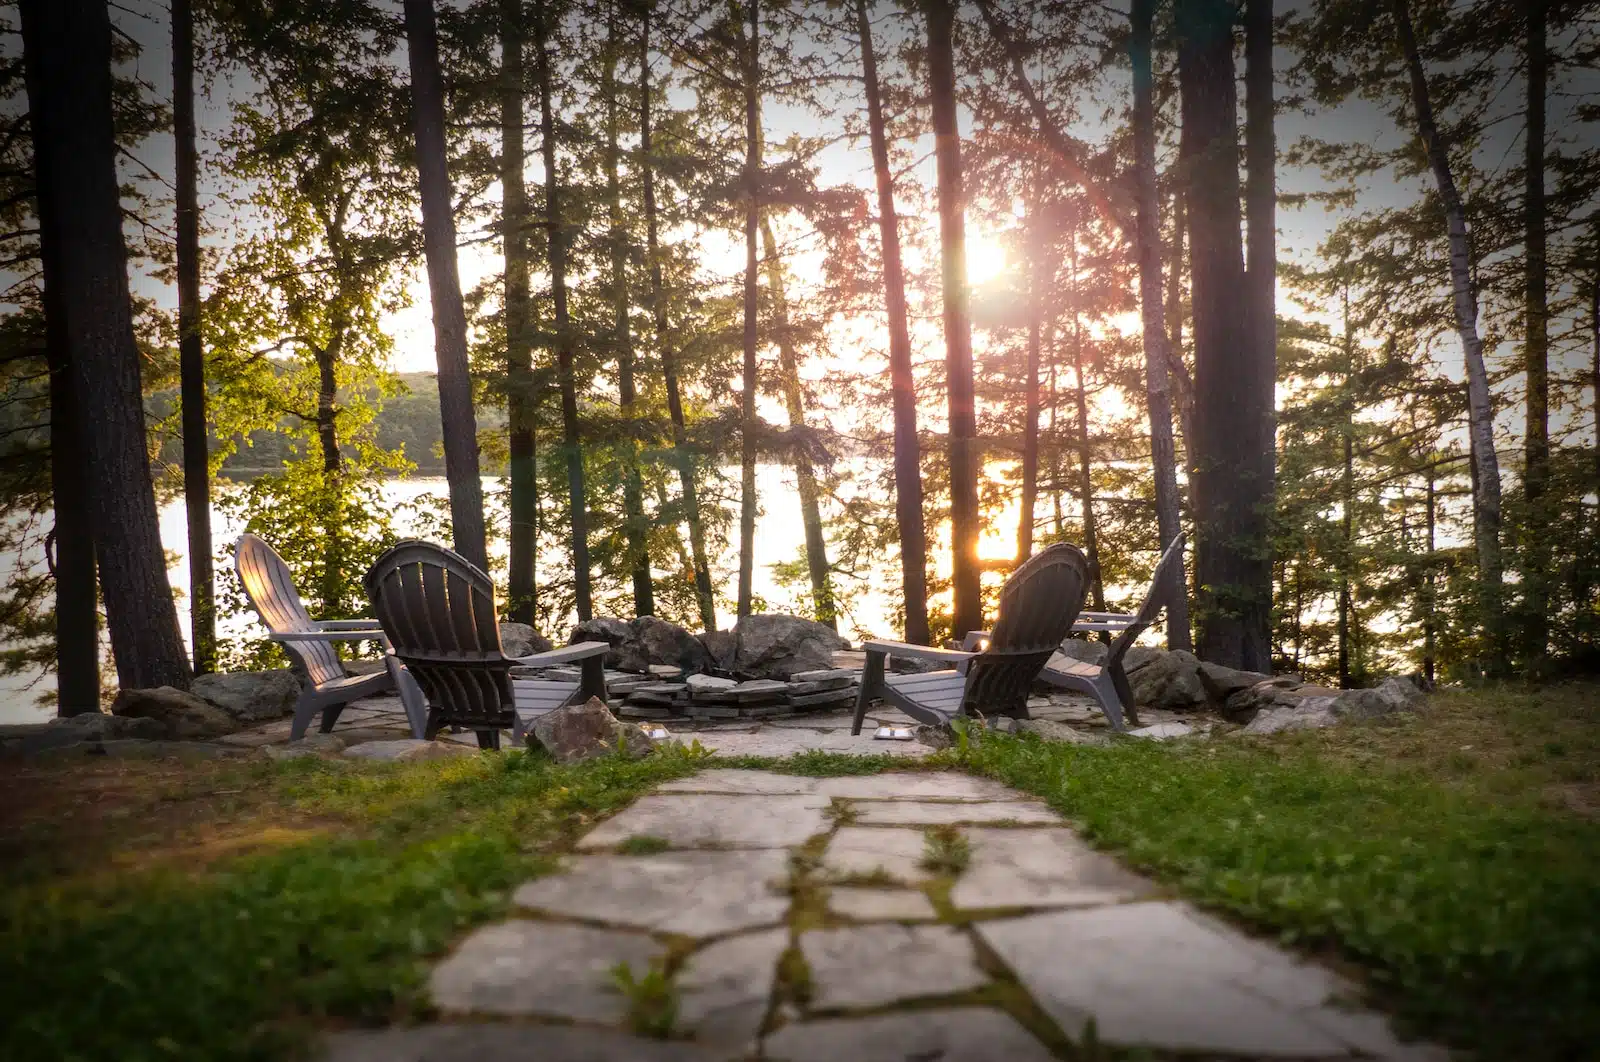 This image depicts a serene outdoor setting in a wooded area near a lake or body of water The scene features several Adirondack-style wooden chairs arranged on a stone patio or path surrounded by lush greenery and tall pine trees The warm golden light of the setting sun filters through the trees creating a peaceful and tranquil atmosphere The overall image conveys a sense of relaxation and connection with nature